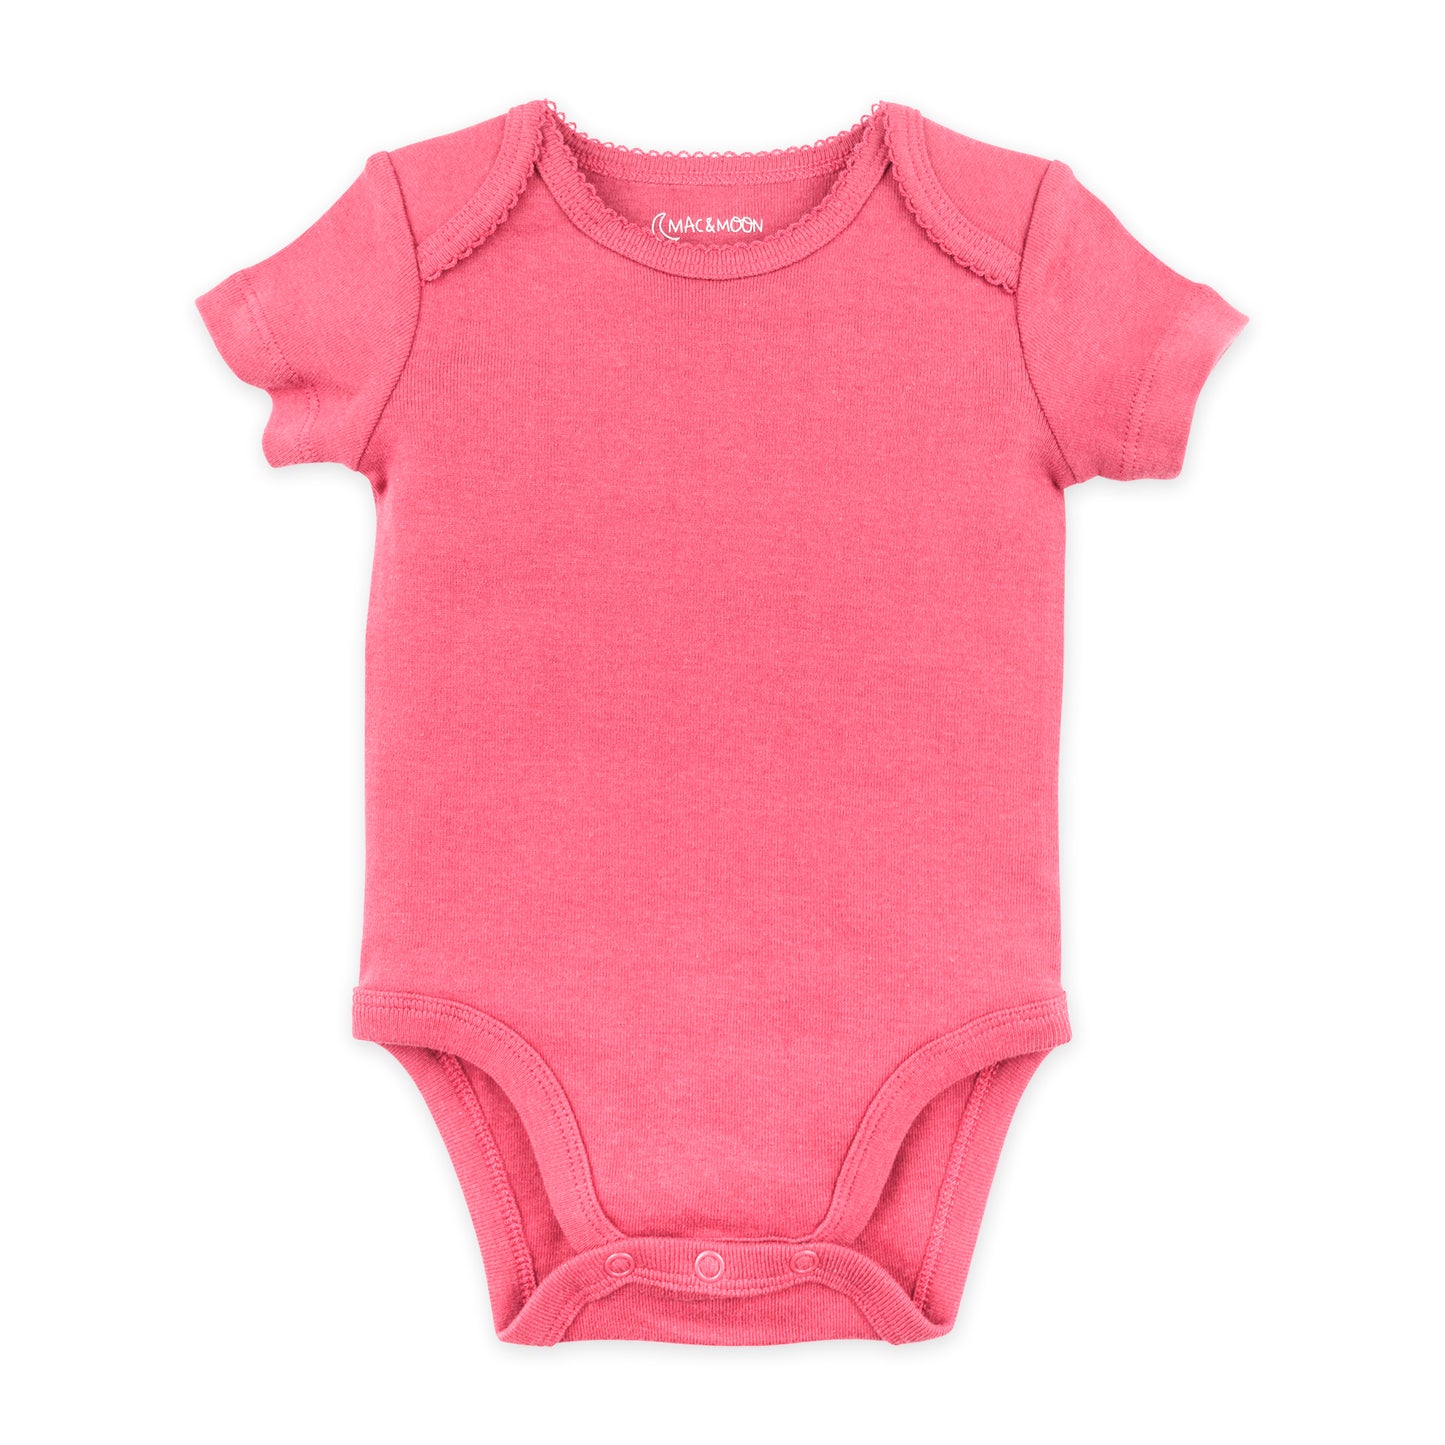 5-Pack Organic Cotton Bodysuit in Bunny Floral Colors